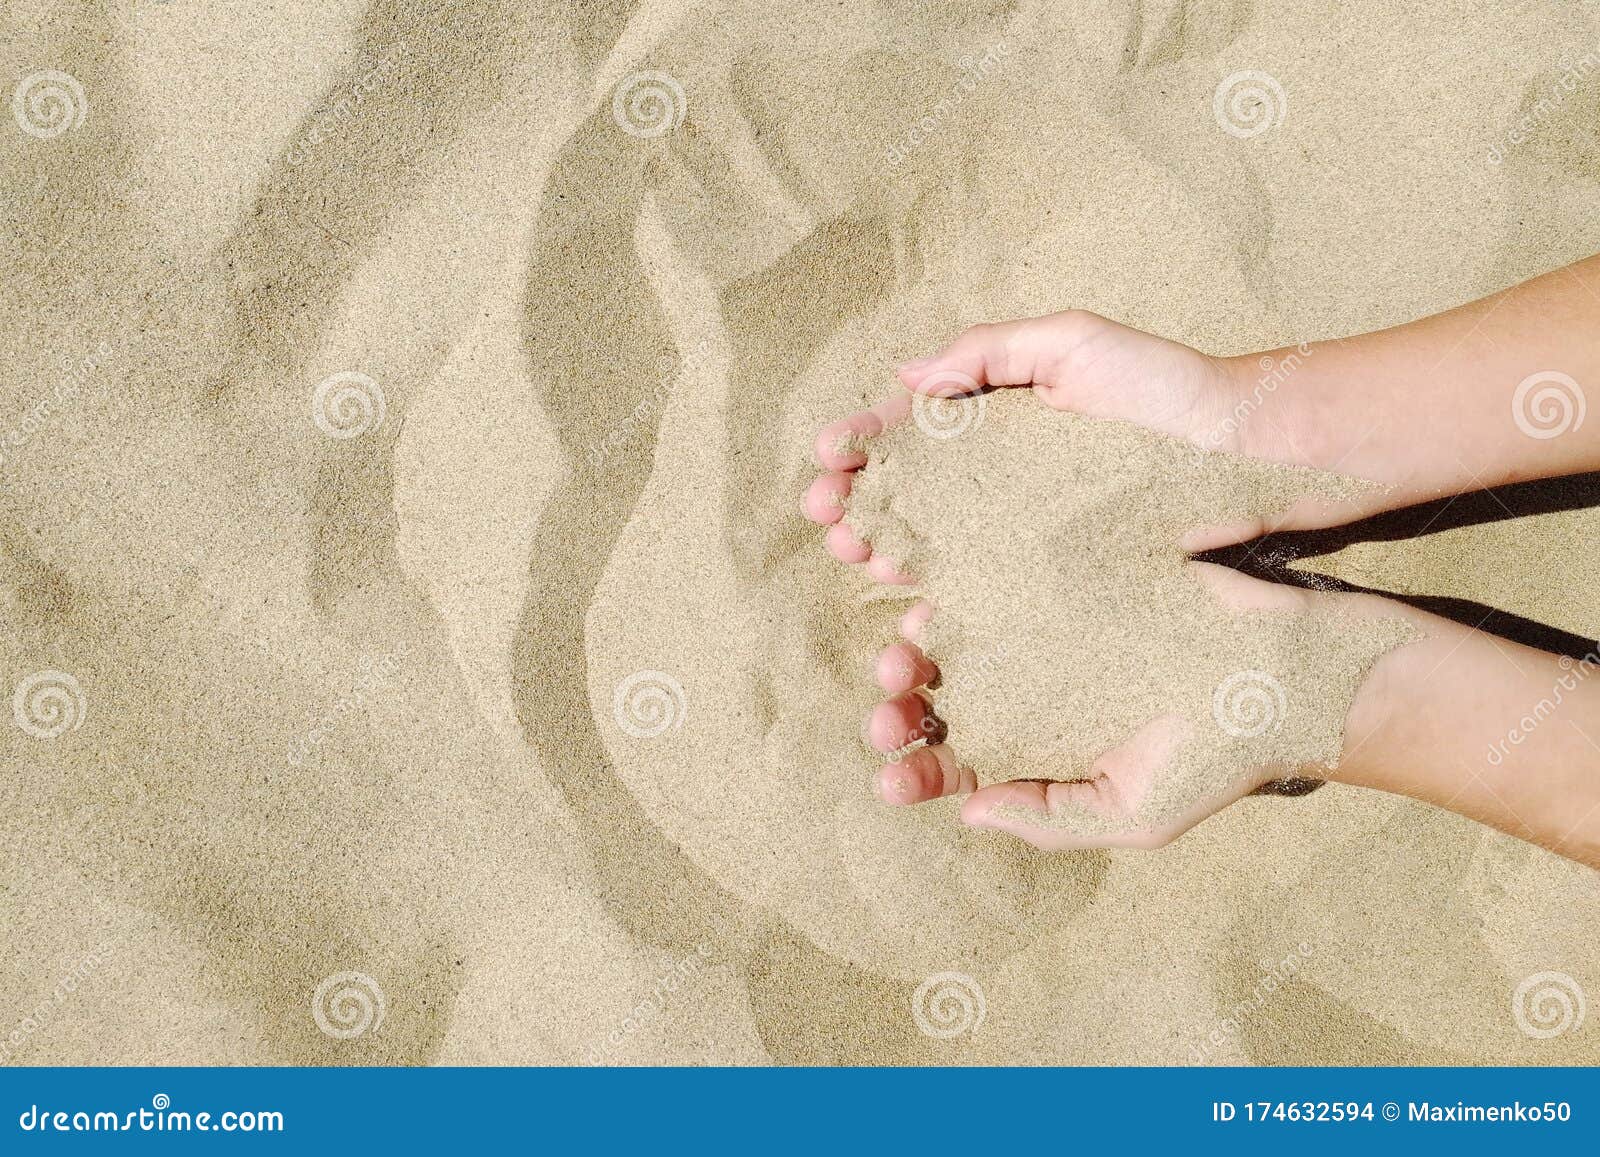 sand in hands of girl. hand strew sand